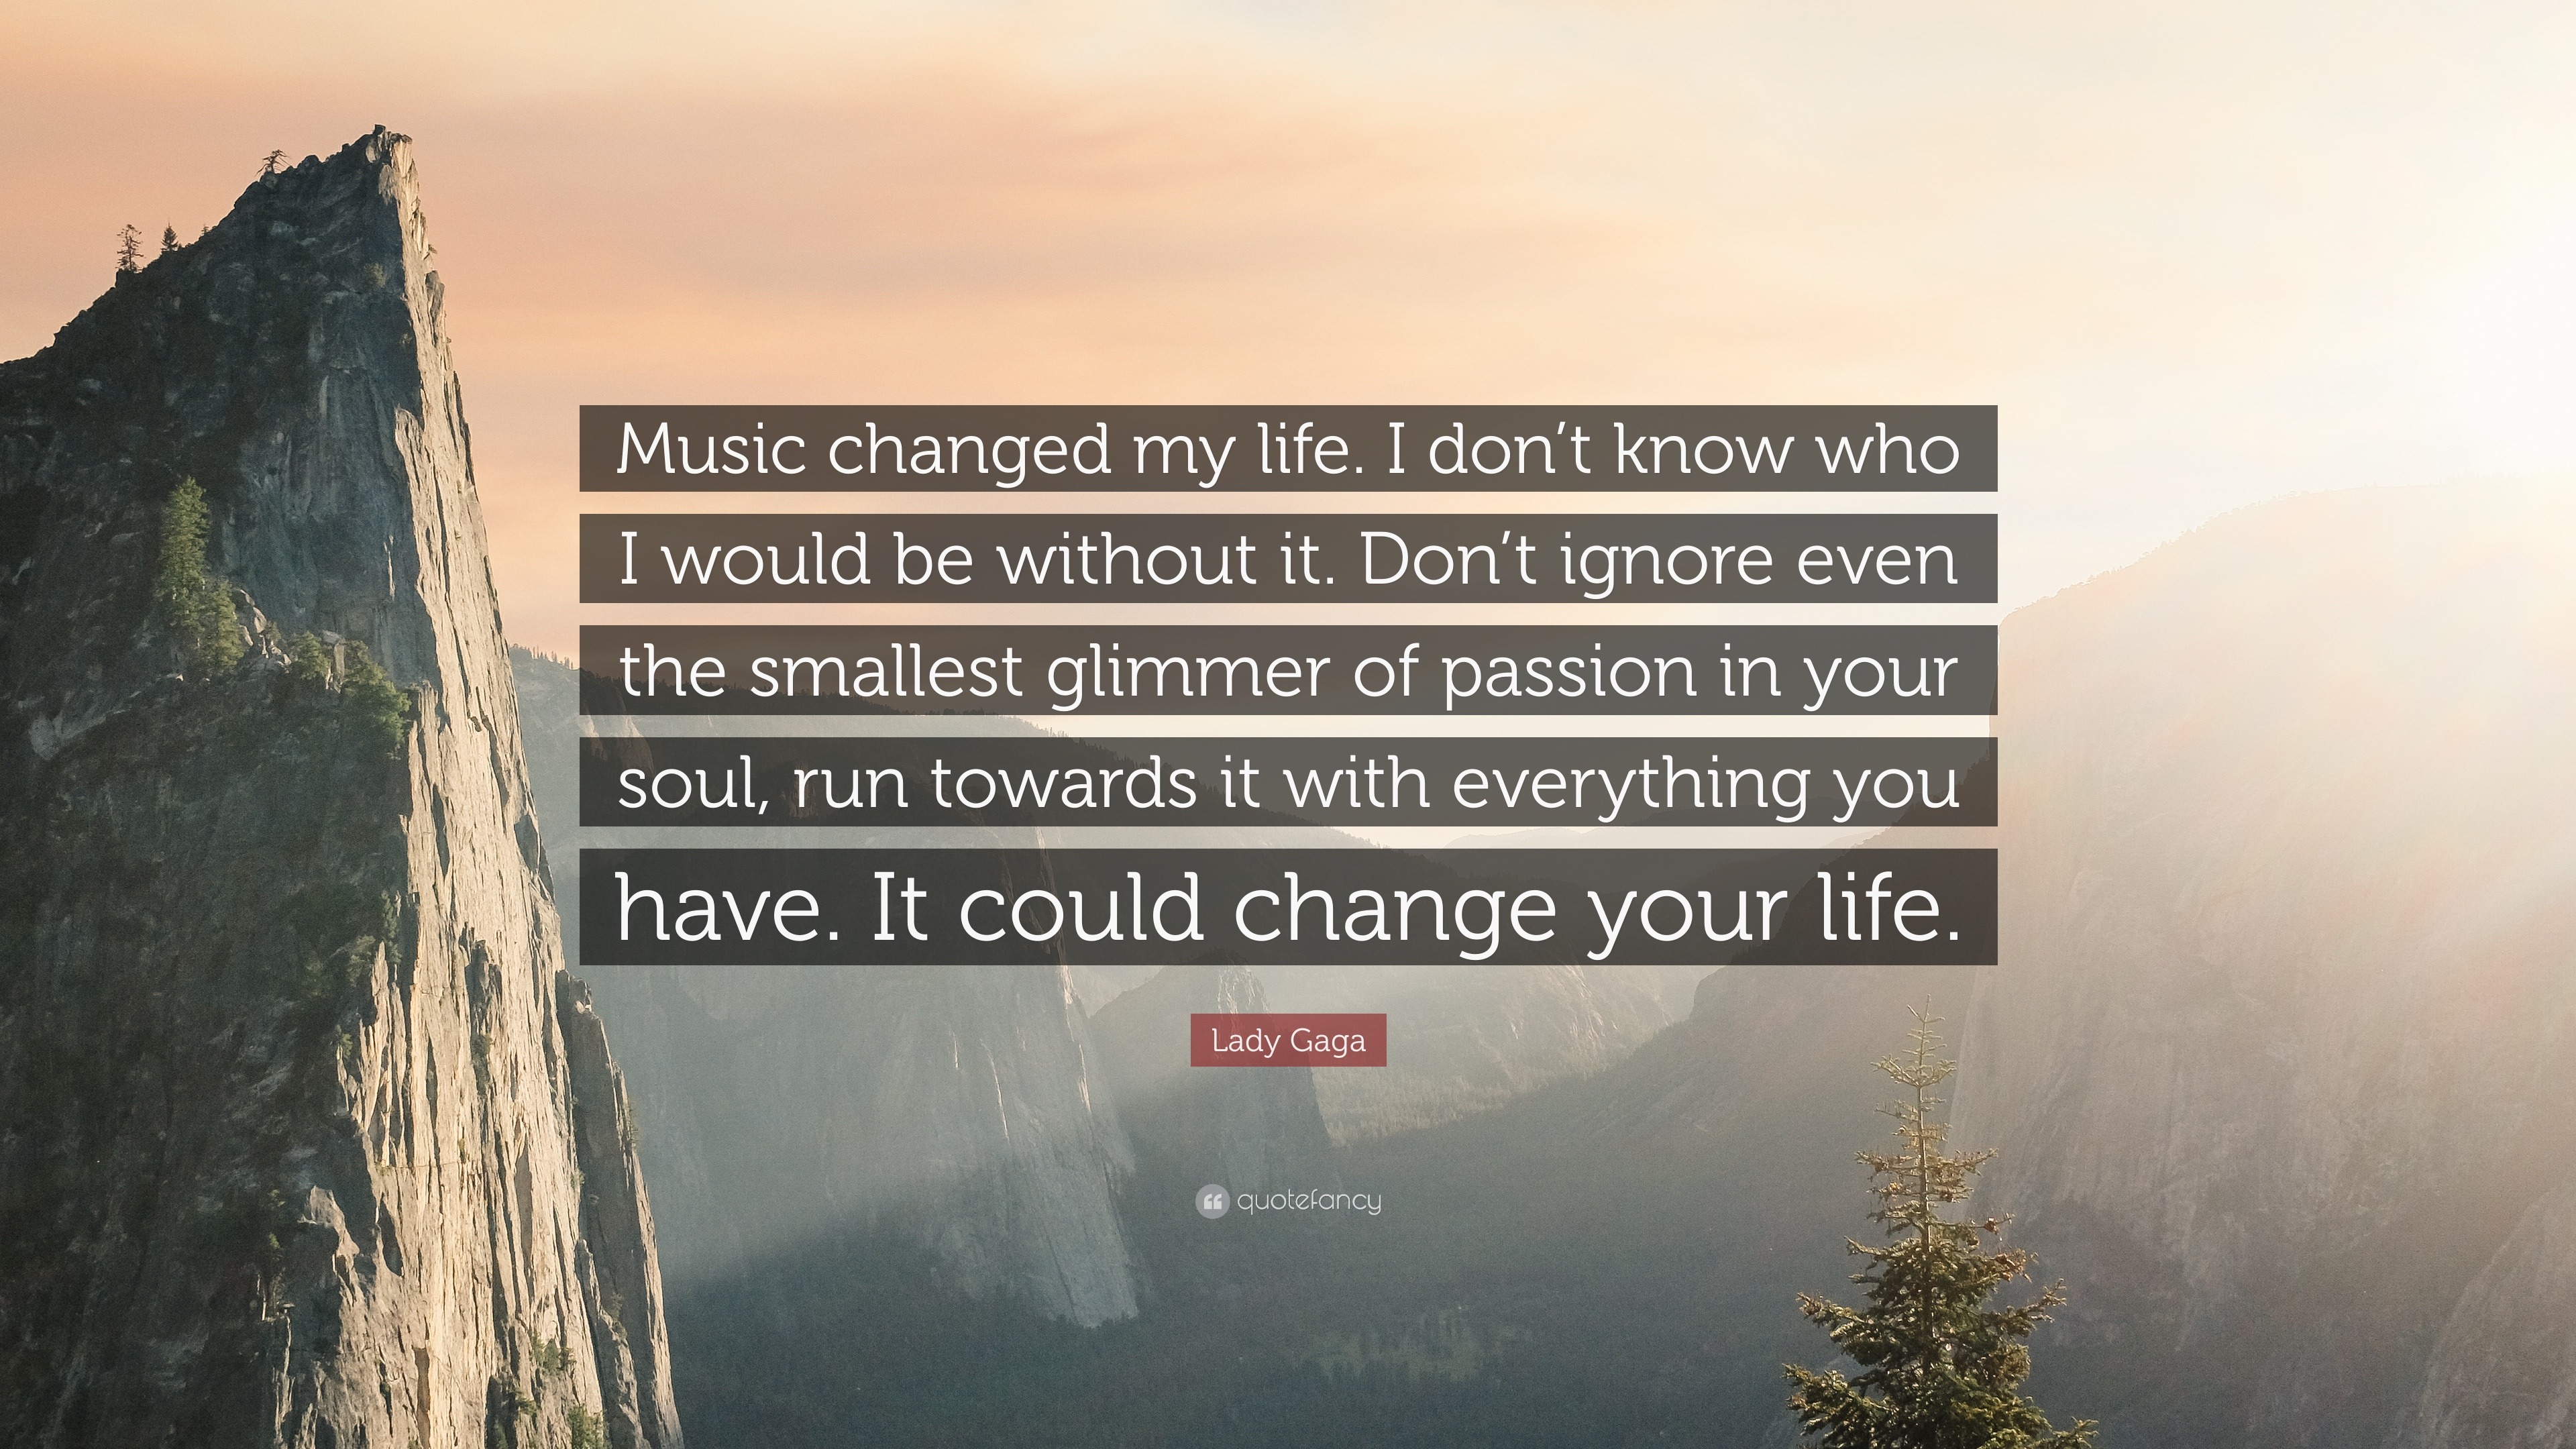 Lady Gaga Quote “Music changed my life I don t know who